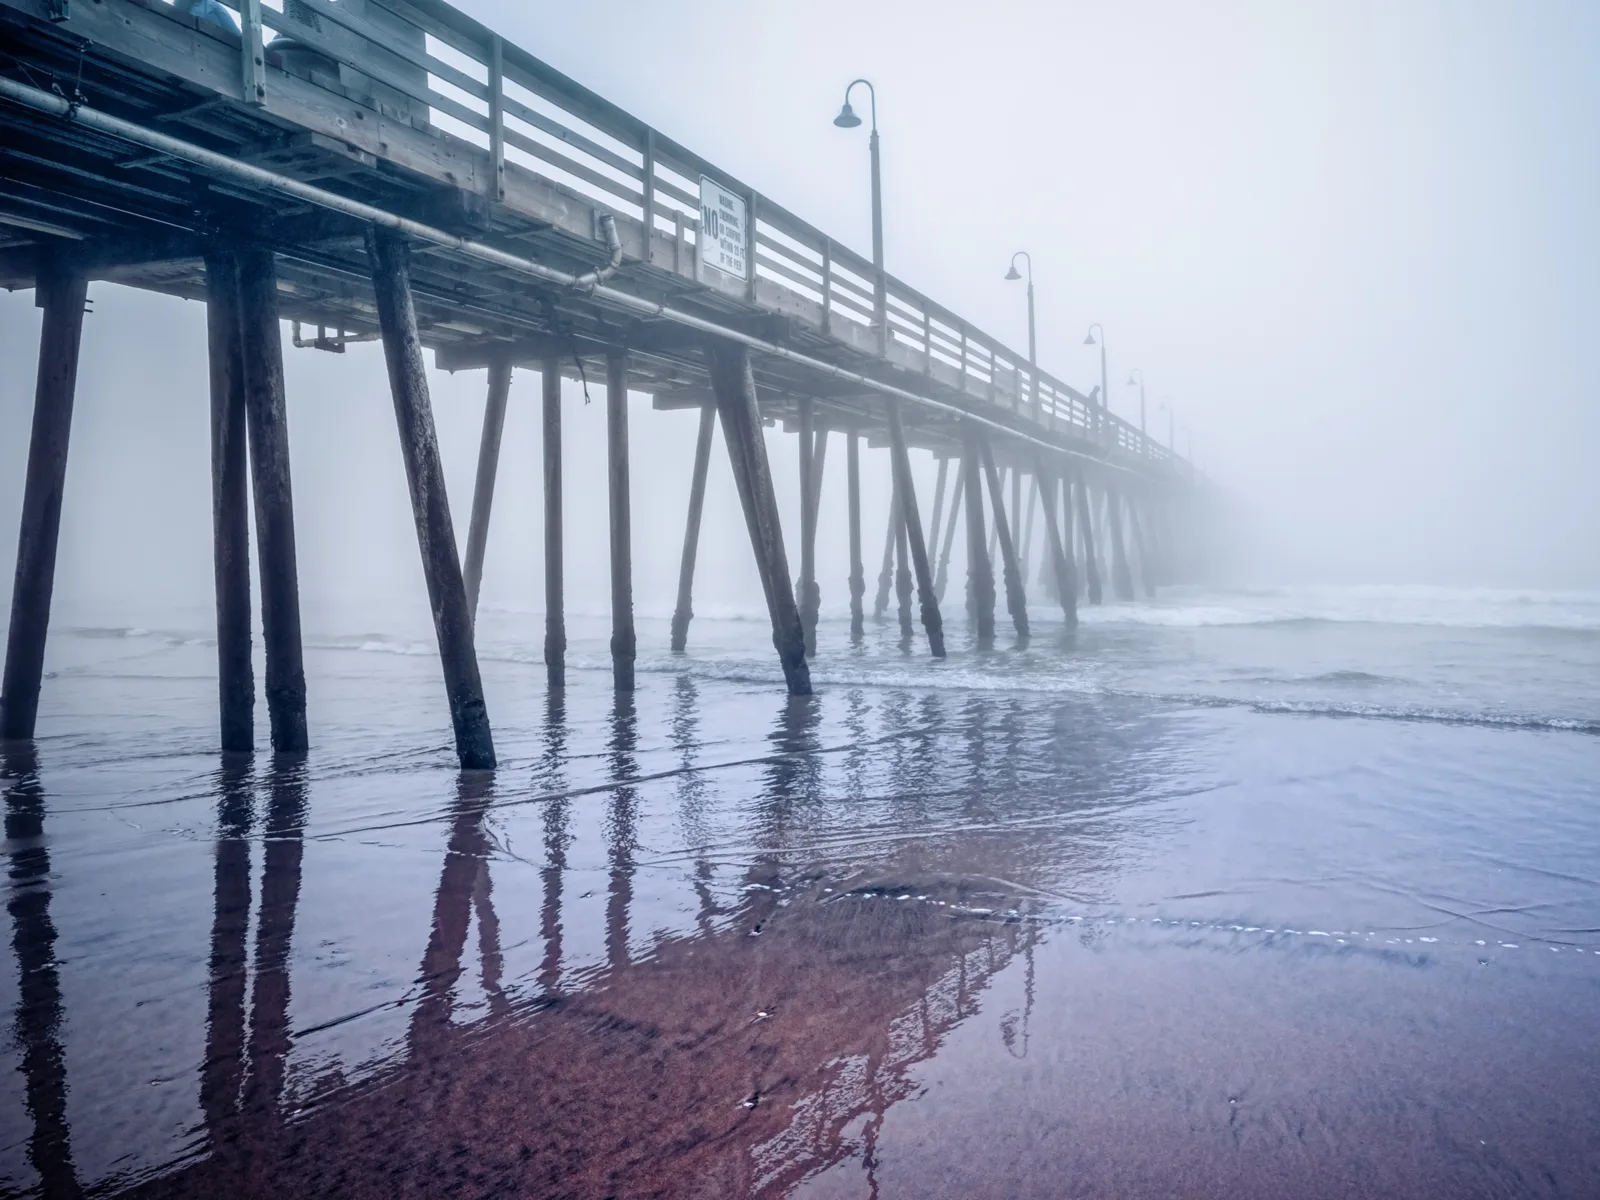 Very foggy pier pictured during the worst time to visit San Diego